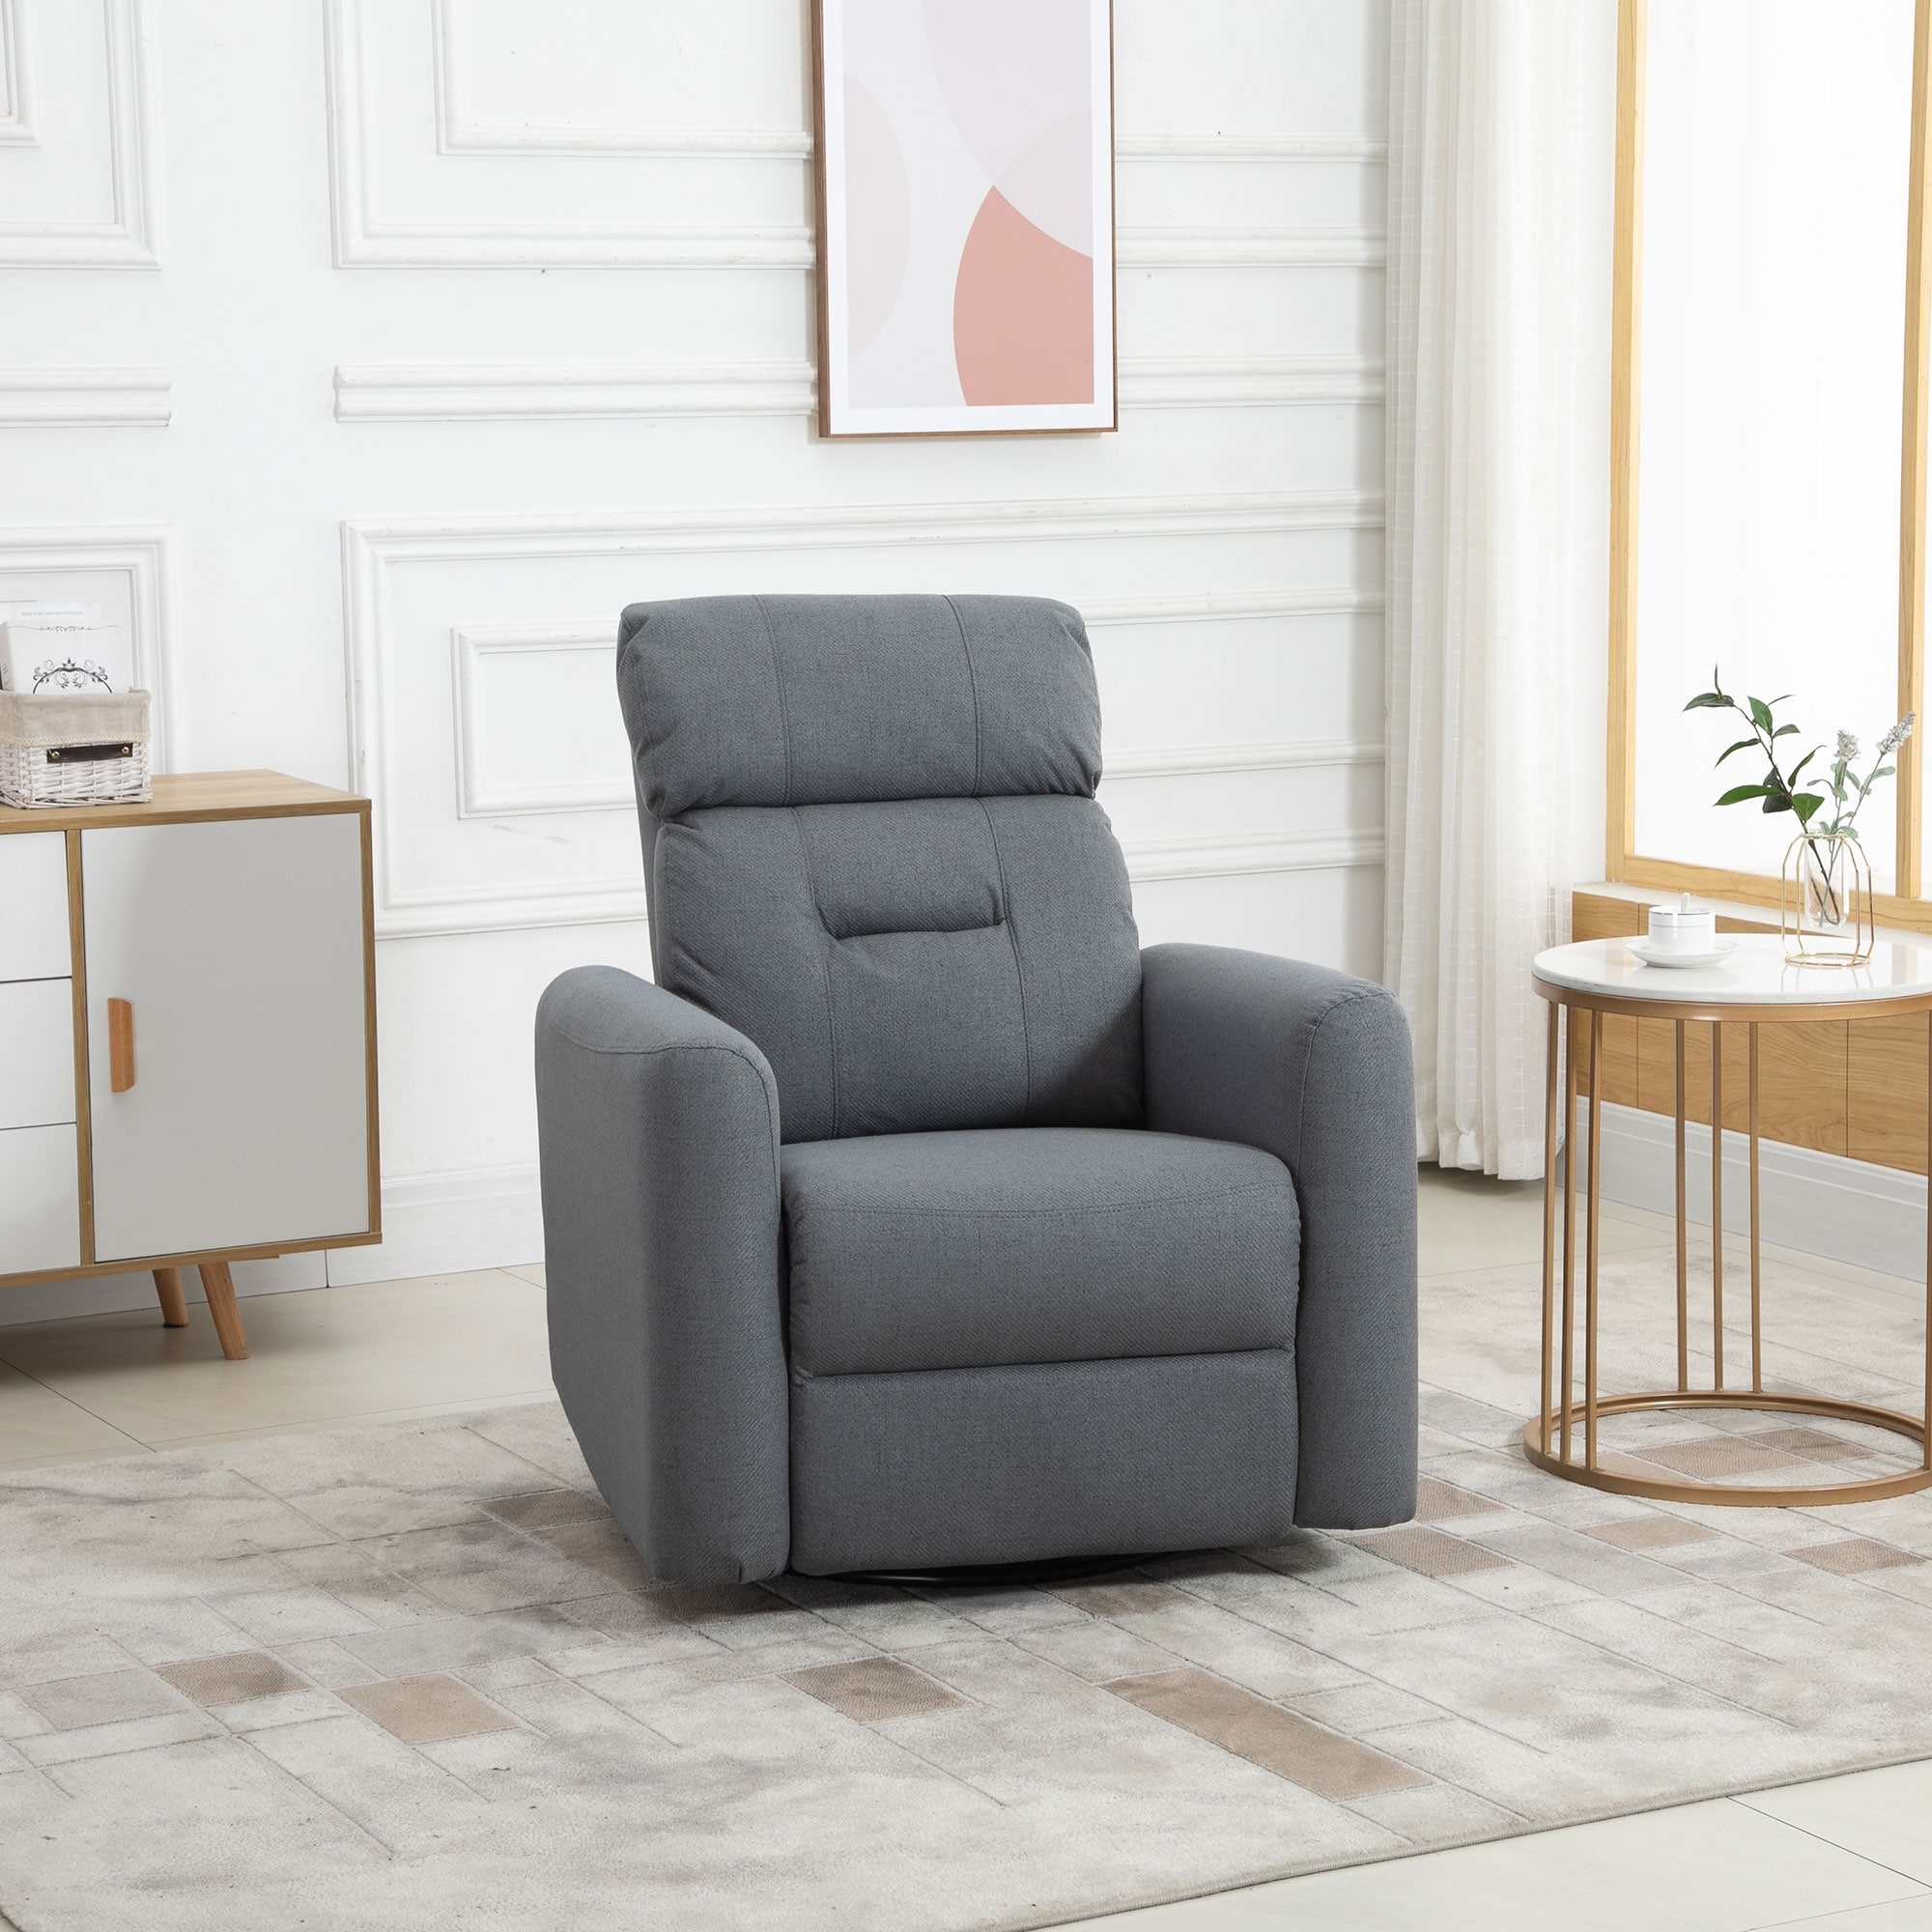 https://ak1.ostkcdn.com/images/products/is/images/direct/3ed486bda583e59705929b4aa0f720f93c4d27d6/HOMCOM-Manual-Recliner-Swivel-Chair-Rocker-Armchair-Sofa-with-Linen-Upholstered-Seat-and-Backrest-for-Living-Room%2C-Beige.jpg